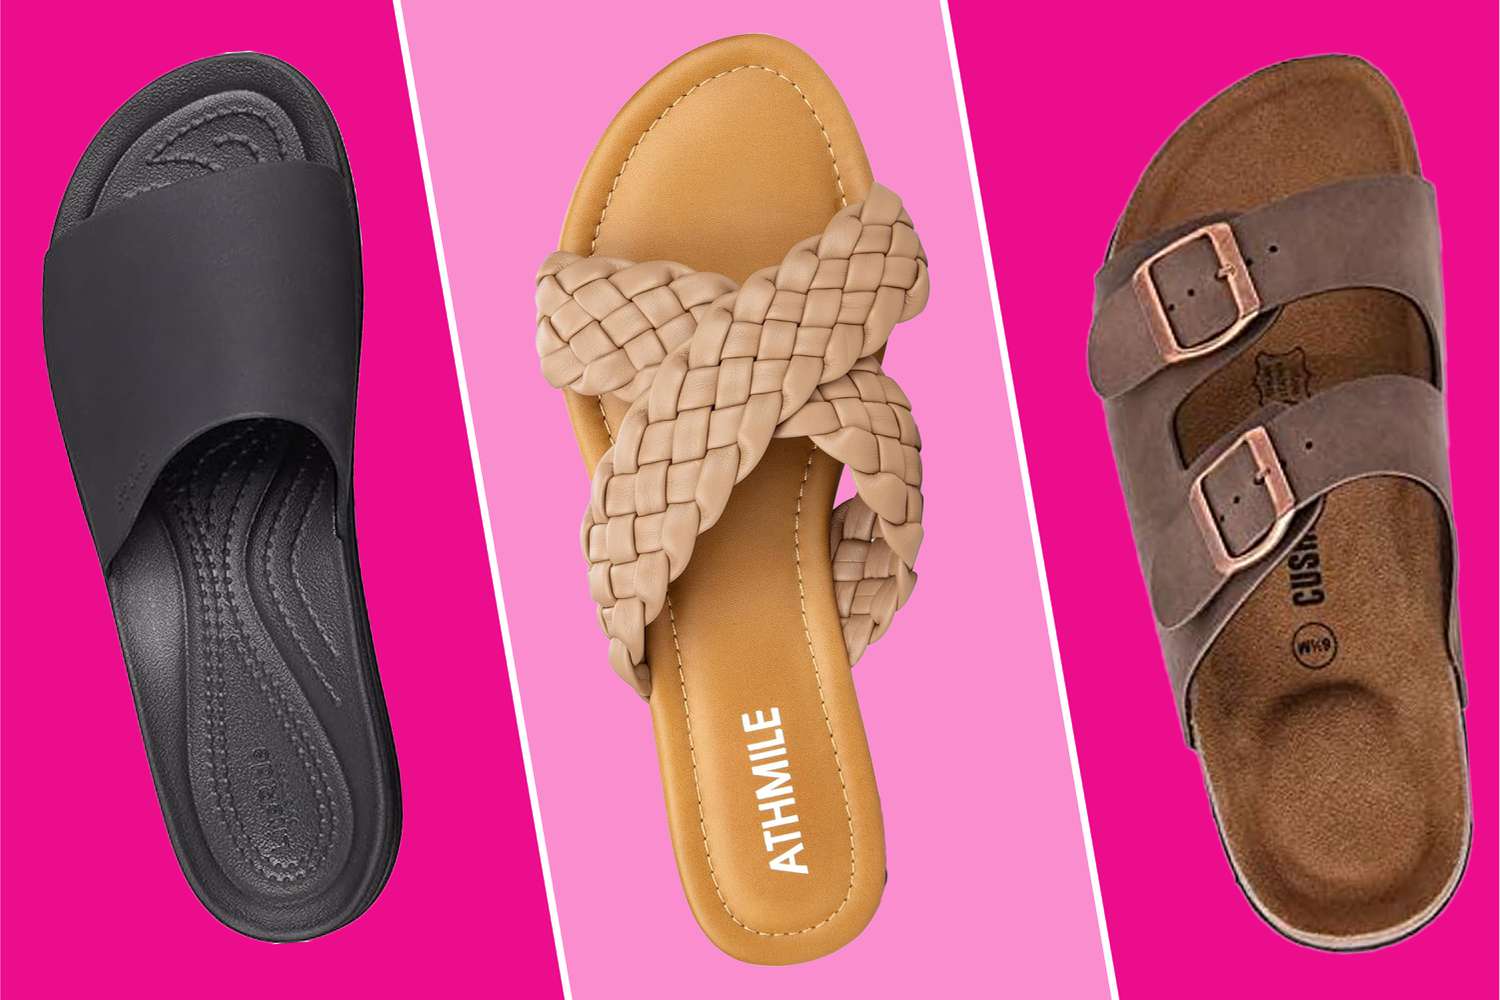 Summer Sandals Are Up to 50% Off at Amazon Right Now [Video]